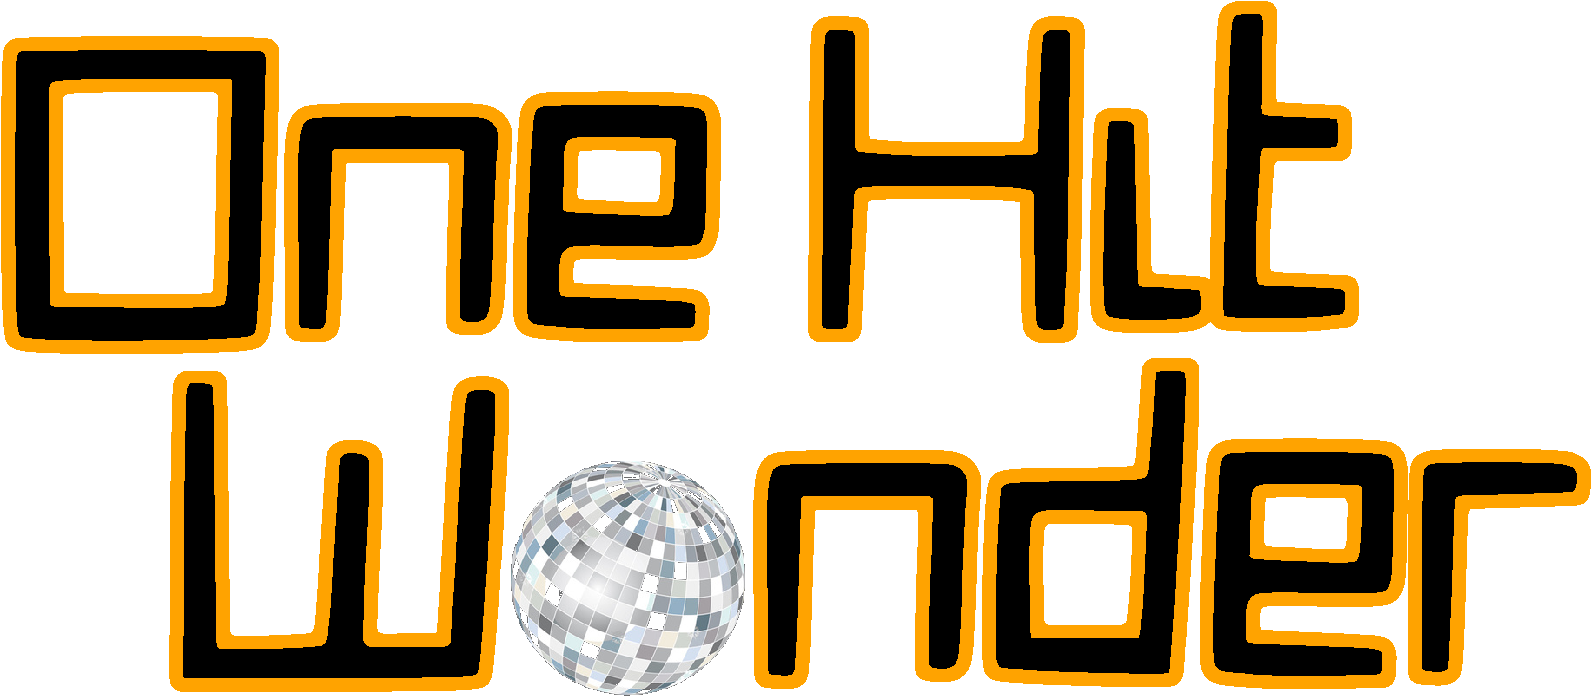 One Hit Wonder Is A Rhythm-tactics Game Set In A Disco - One Hit Wonder Is A Rhythm-tactics Game Set In A Disco (3000x800)